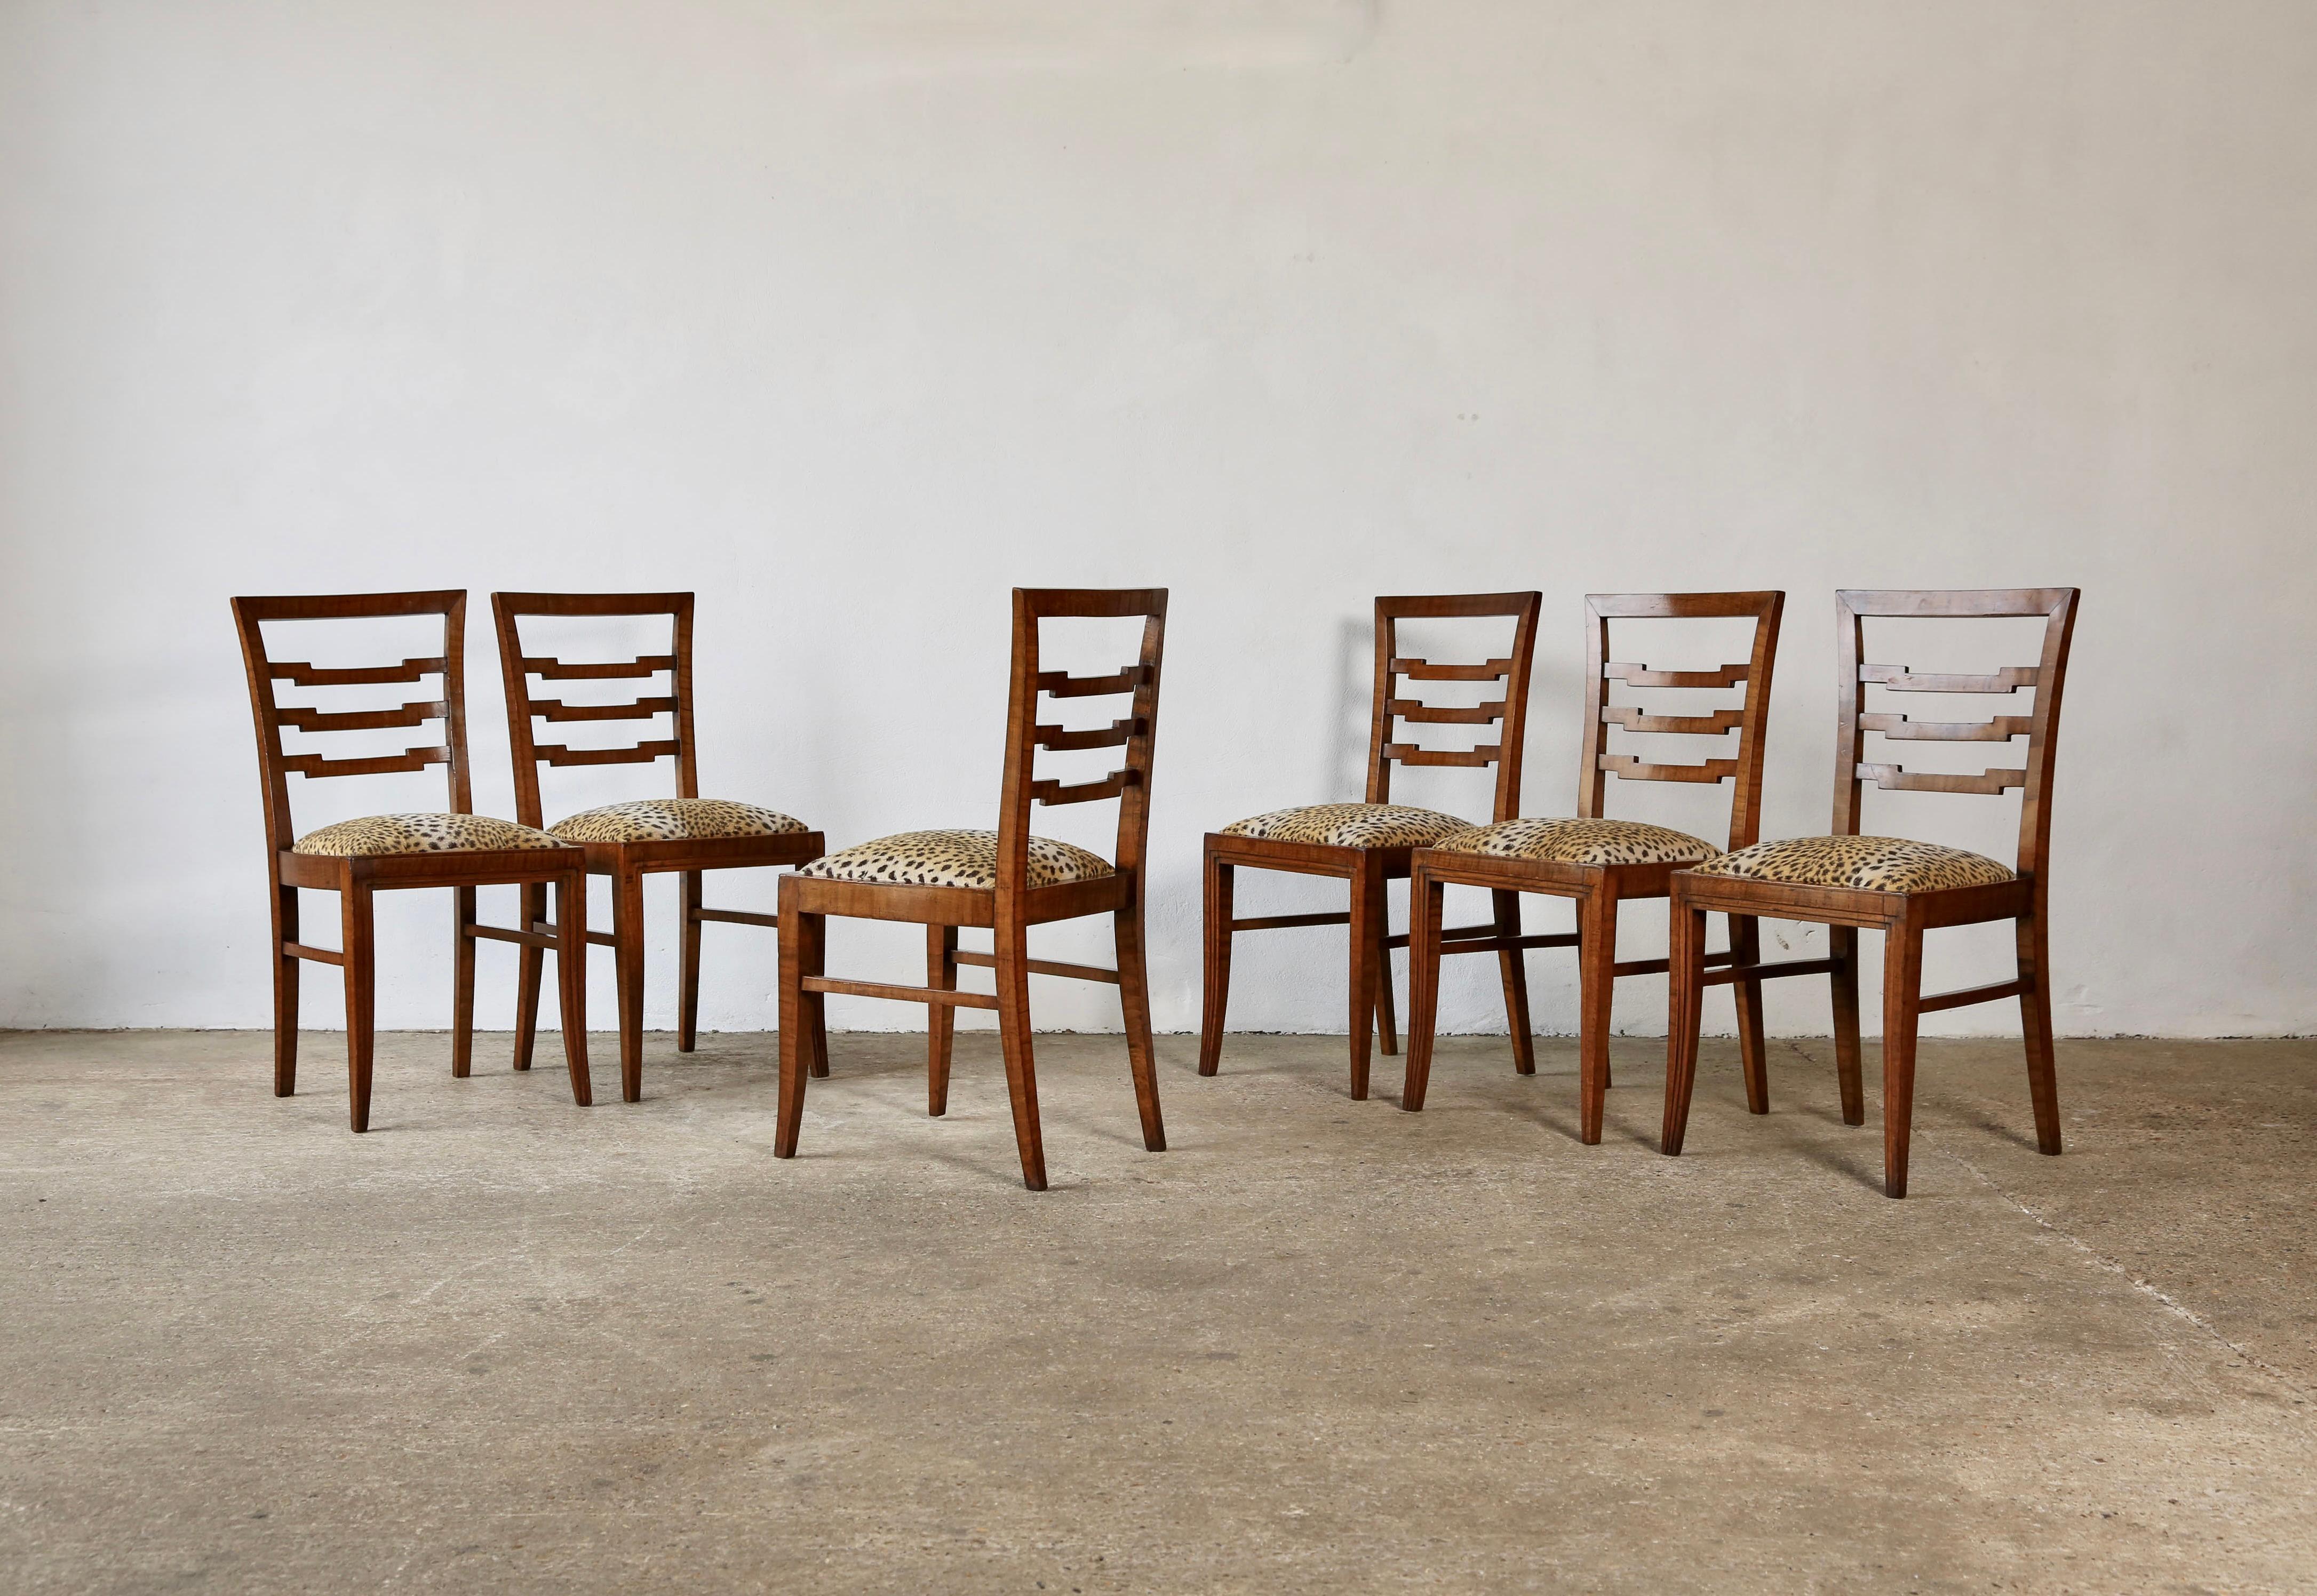 Rare set of eight 1940s Italian Dining Chairs attributed to Gio Ponti.  Fast shipping worldwide.

Carver Dims (cm): H100 W60 D57 SH54
Dining Chair Dims (cm): H94 W44.5 D50 SH54
  
